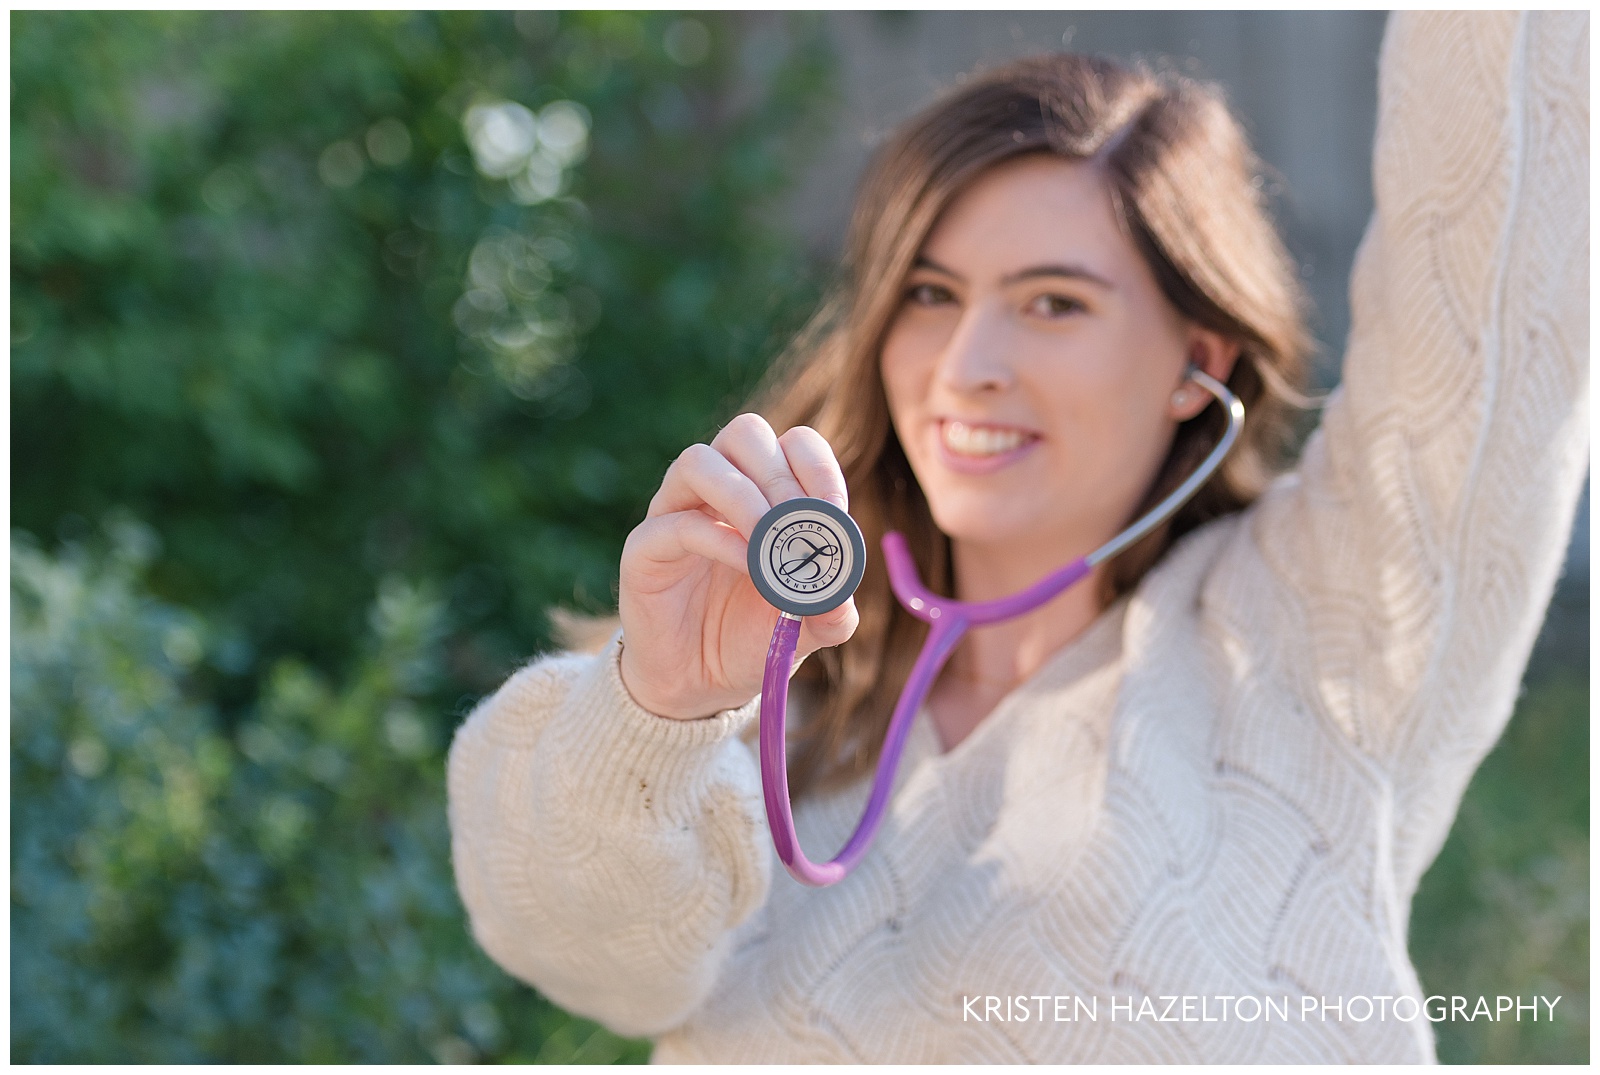 Nursing school senior portrait of a nurse-in-training holding out her stethoscope and cheering